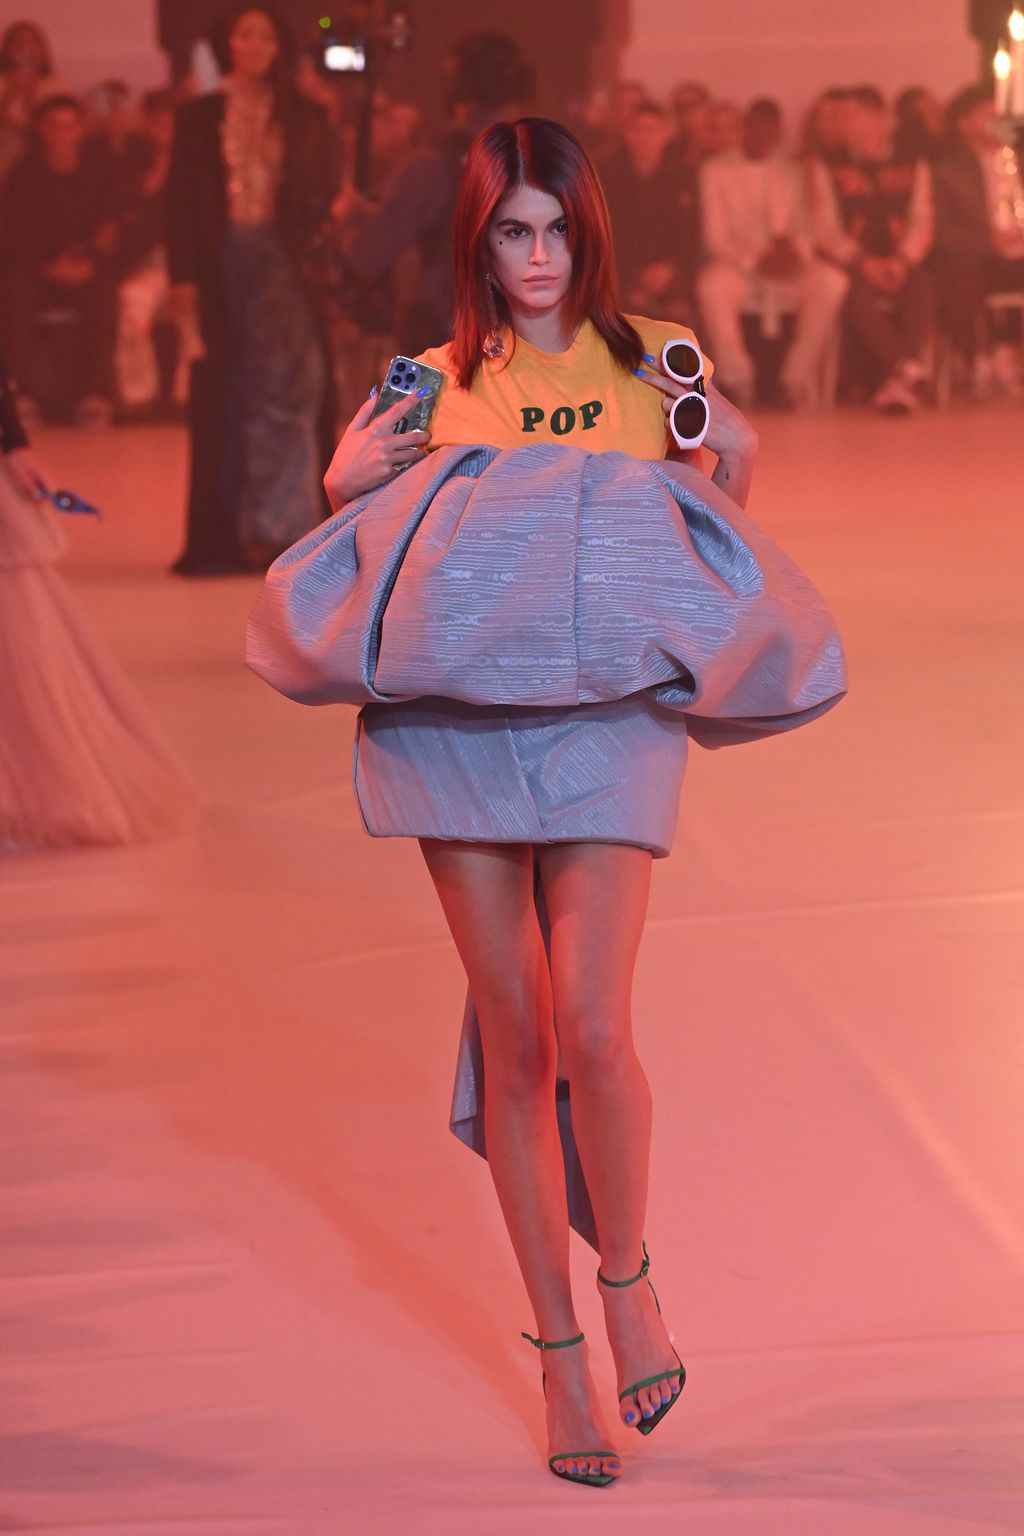 PARIS, FRANCE - FEBRUARY 28: (EDITORIAL USE ONLY - For Non-Editorial use please seek approval from Fashion House) Kaia Gerber walks the runway during the Off-White Womenswear Fall/Winter 2022-2023 show as part of Paris Fashion Week on February 28, 2022 in Paris, France. (Photo by Pascal Le Segretain/Getty Images)